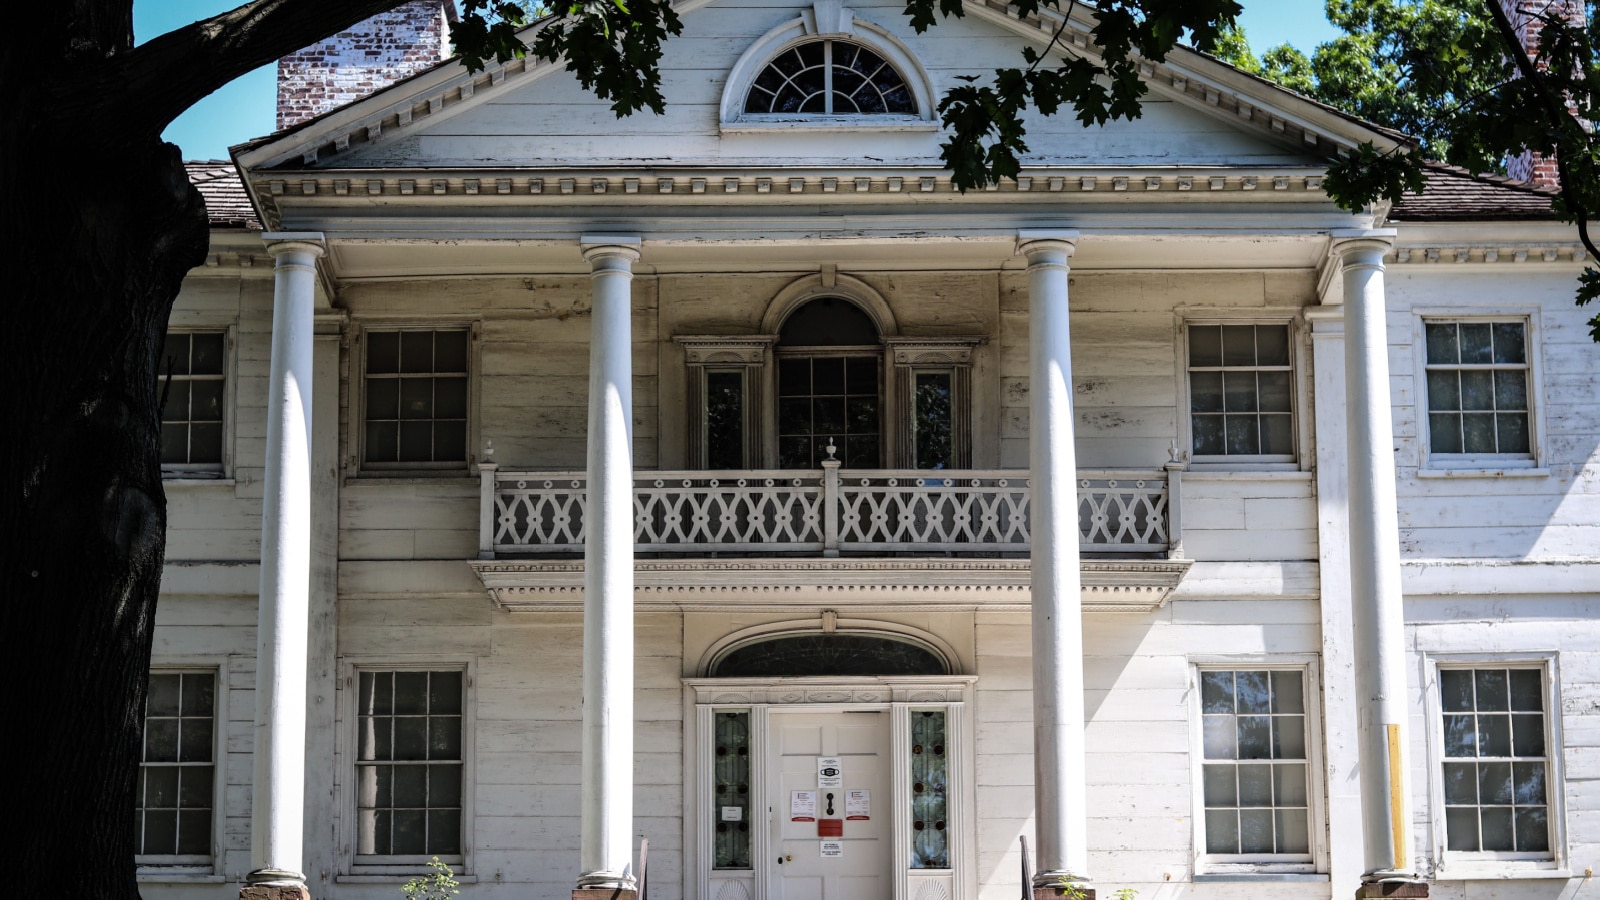 New York City, NY United States - June 30, 2022: The Morris-Jumel Mansion is a historic museum, home to Aaron Burr, war room to George Washington. A topic of ghost tours and paranormal investigations.